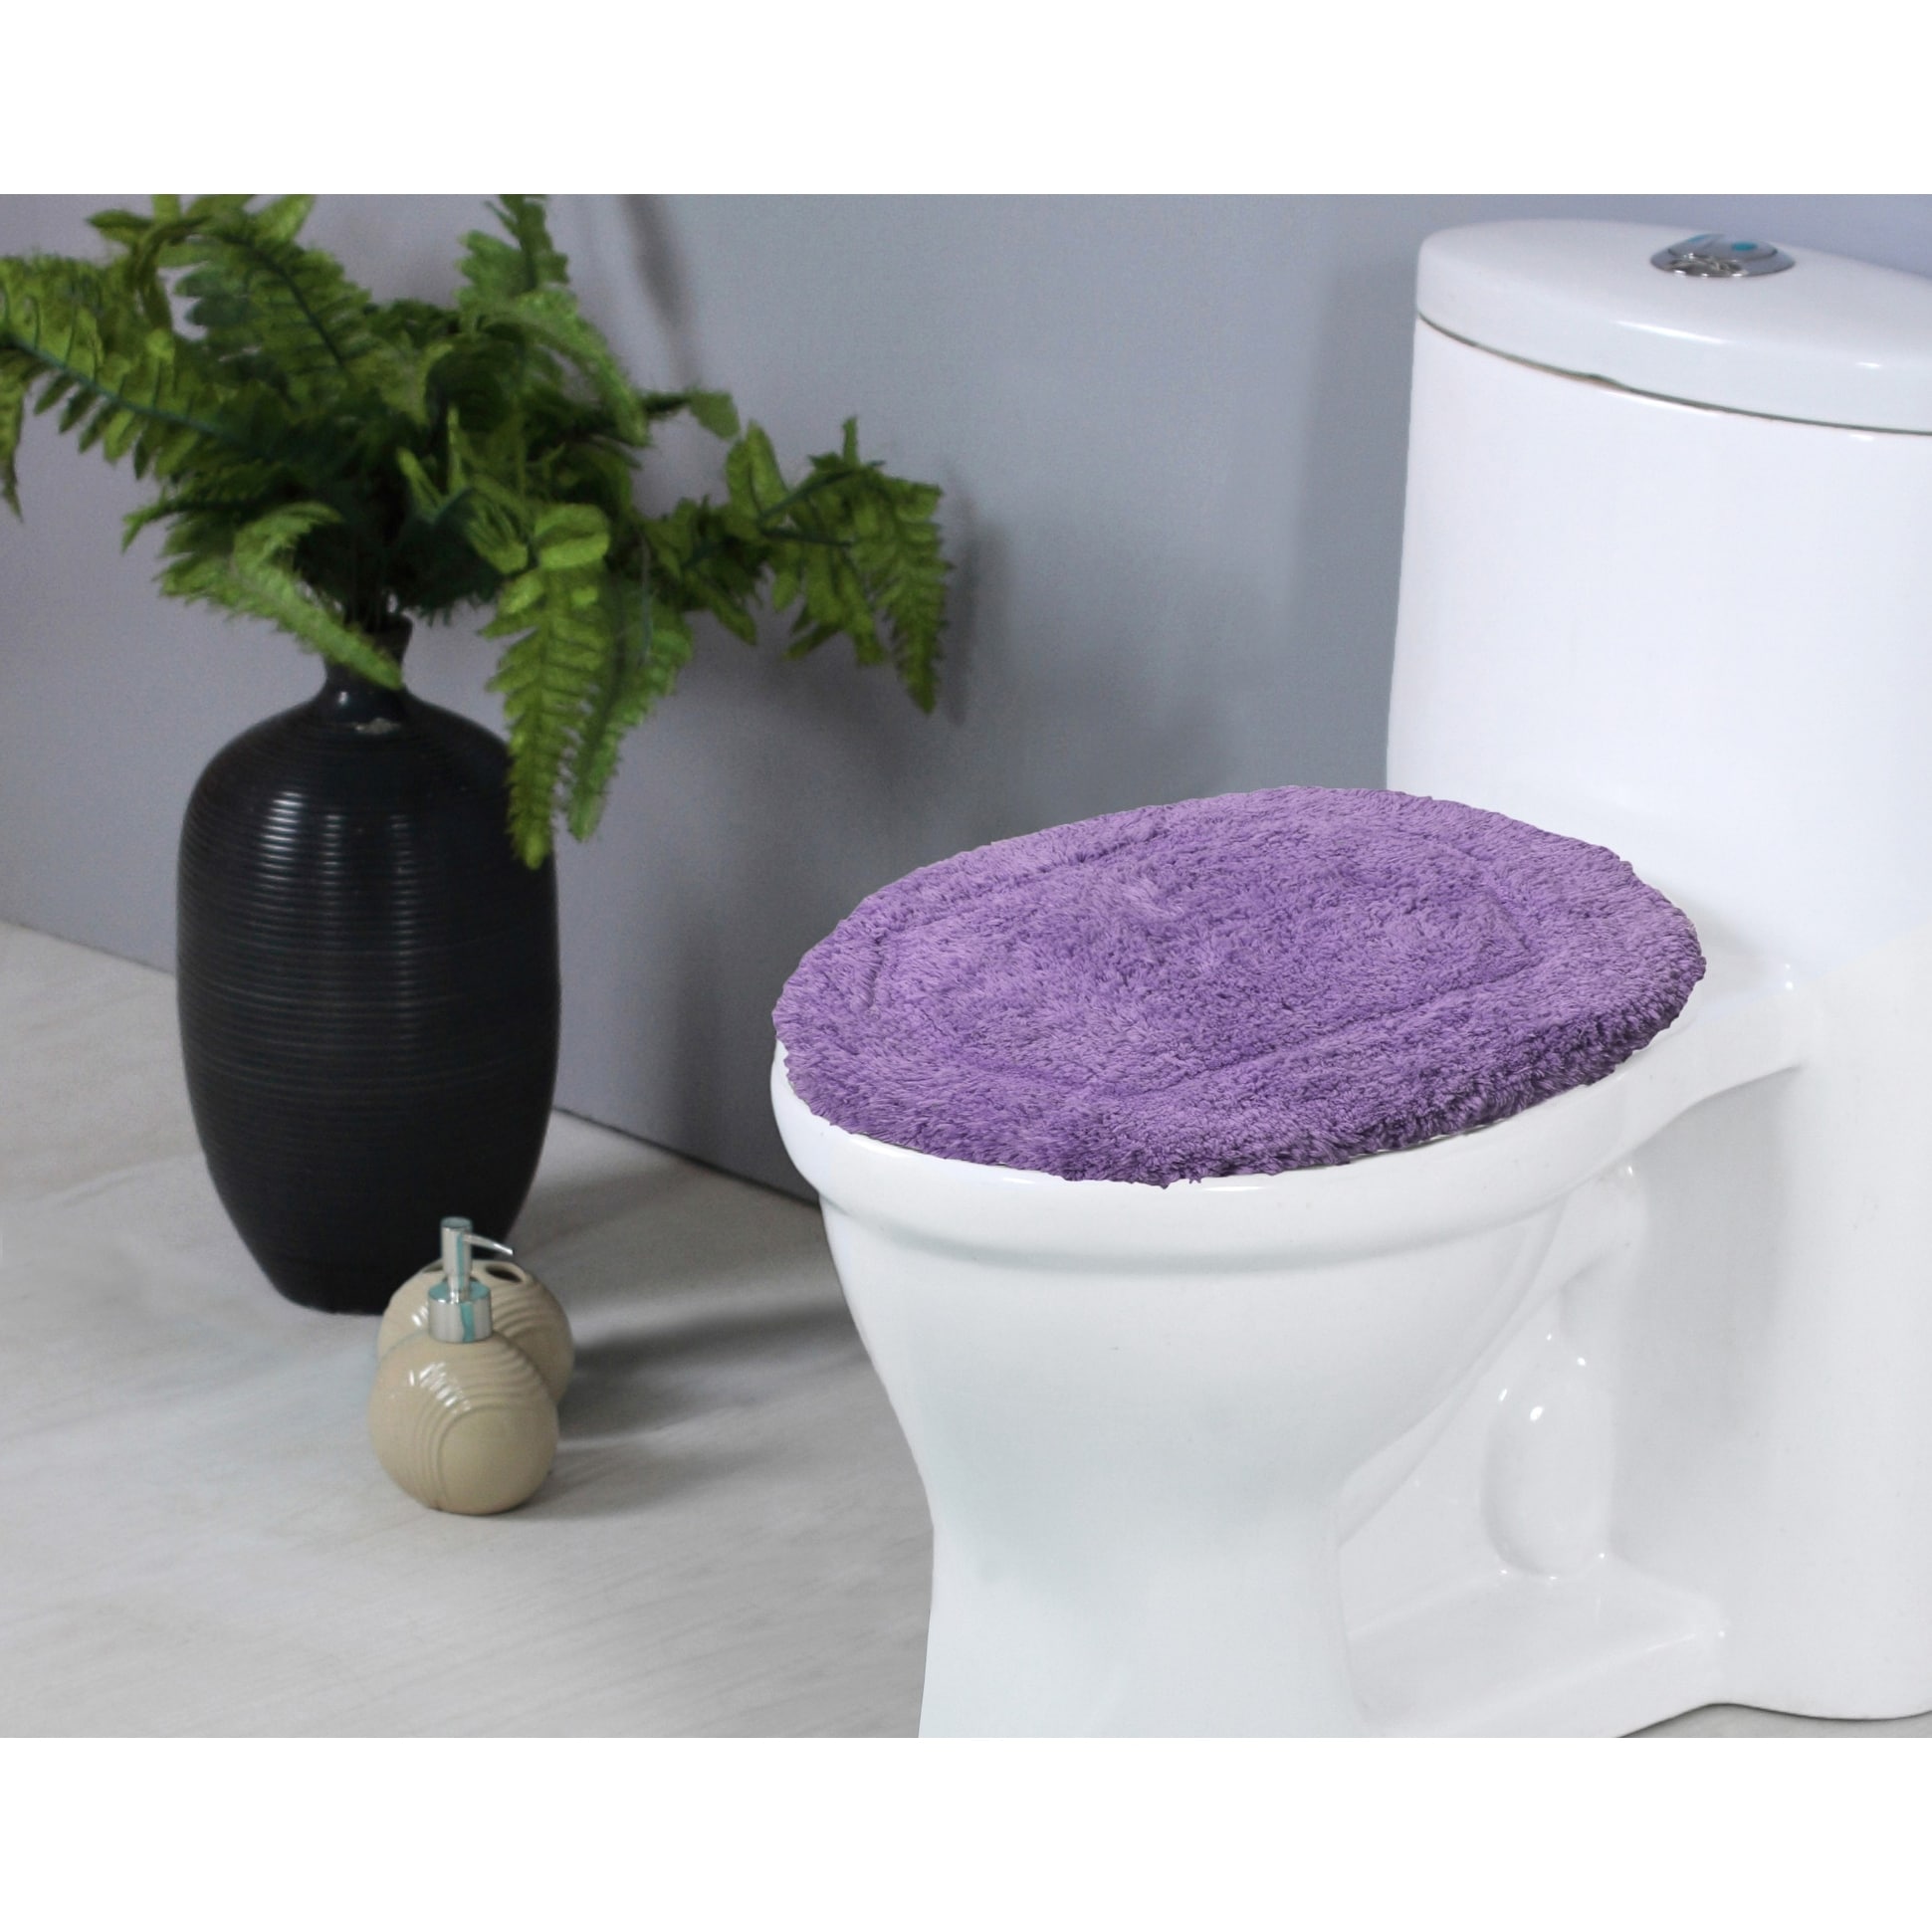 Search for Bathroom Toilet Seat Covers  Discover our Best Deals at Bed  Bath & Beyond